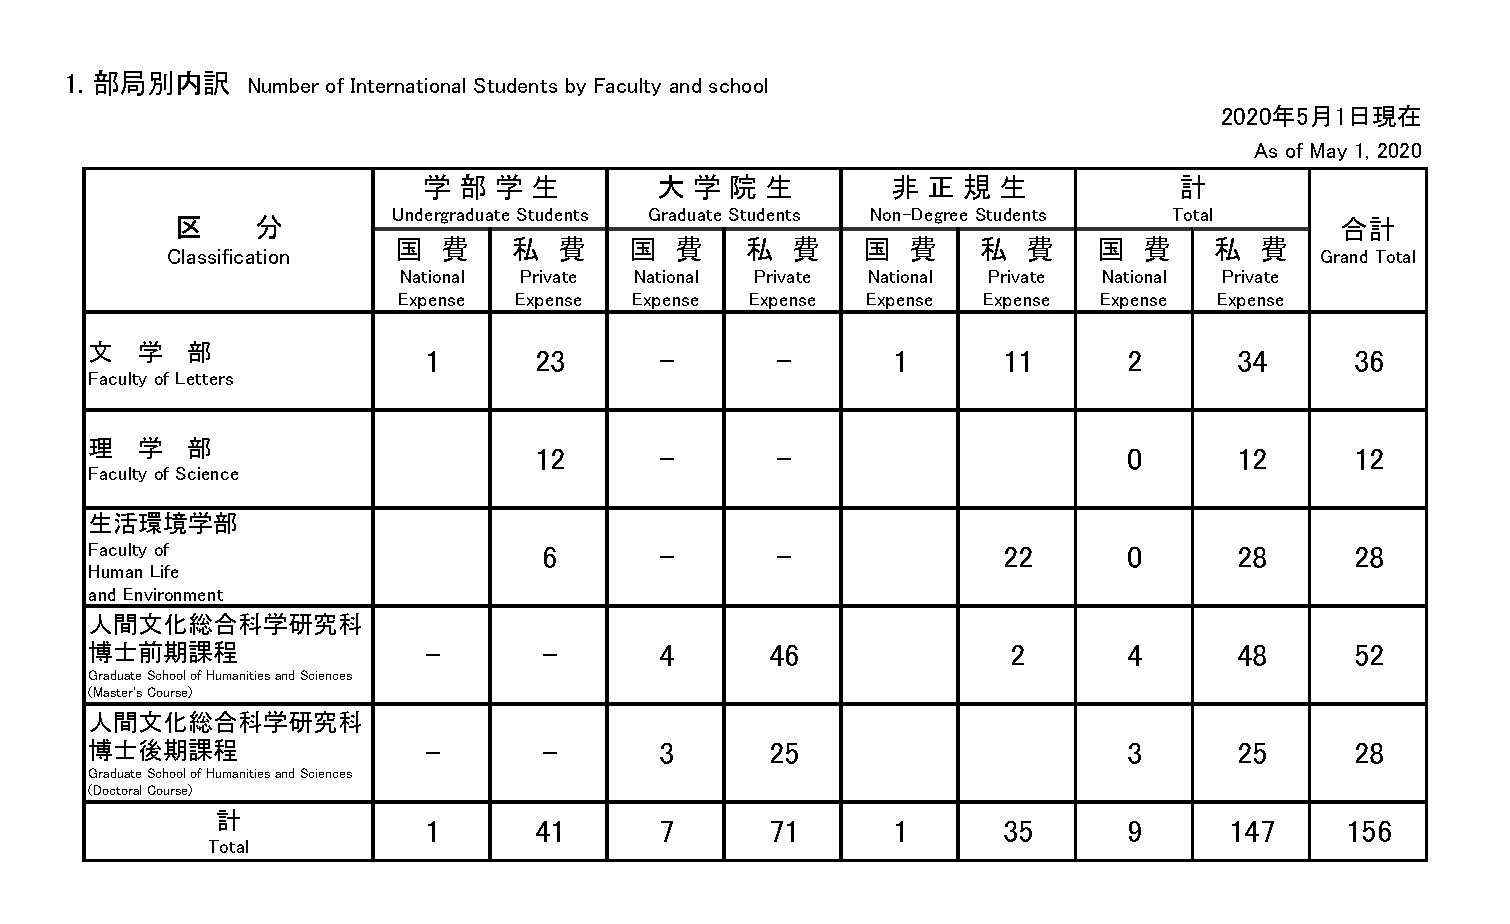 Number of International Students by Faculty